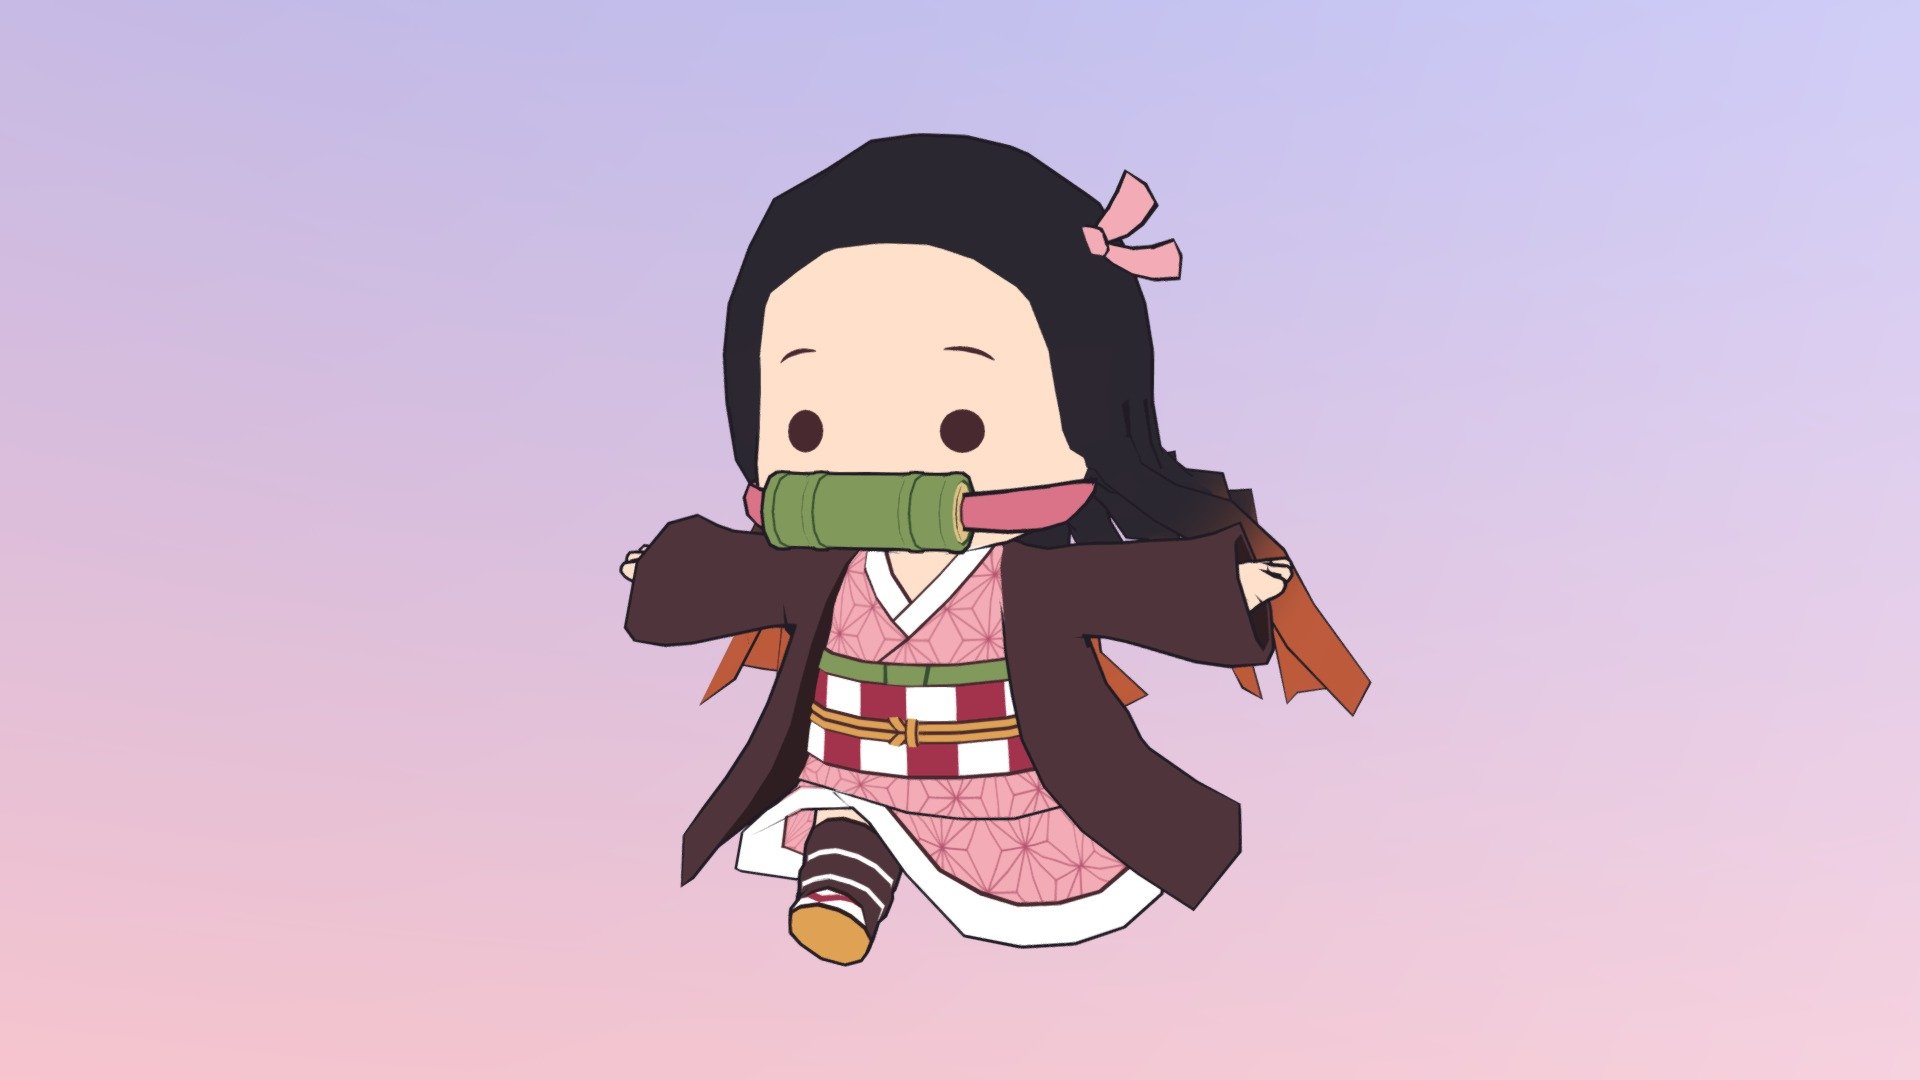 A chibi Nezuko from the anime &lsquo;Demon Slayer: Kimetsu no Yaiba', created as an avatar for VRChat. Modelled and animated in Blender 2.8

Full avatar is available to buy here: https://jinsters.booth.pm/items/1591961 - Chibi Nezuko (Kimetsu no Yaiba) - VRChat Avatar - 3D model by Jinsters 3d model